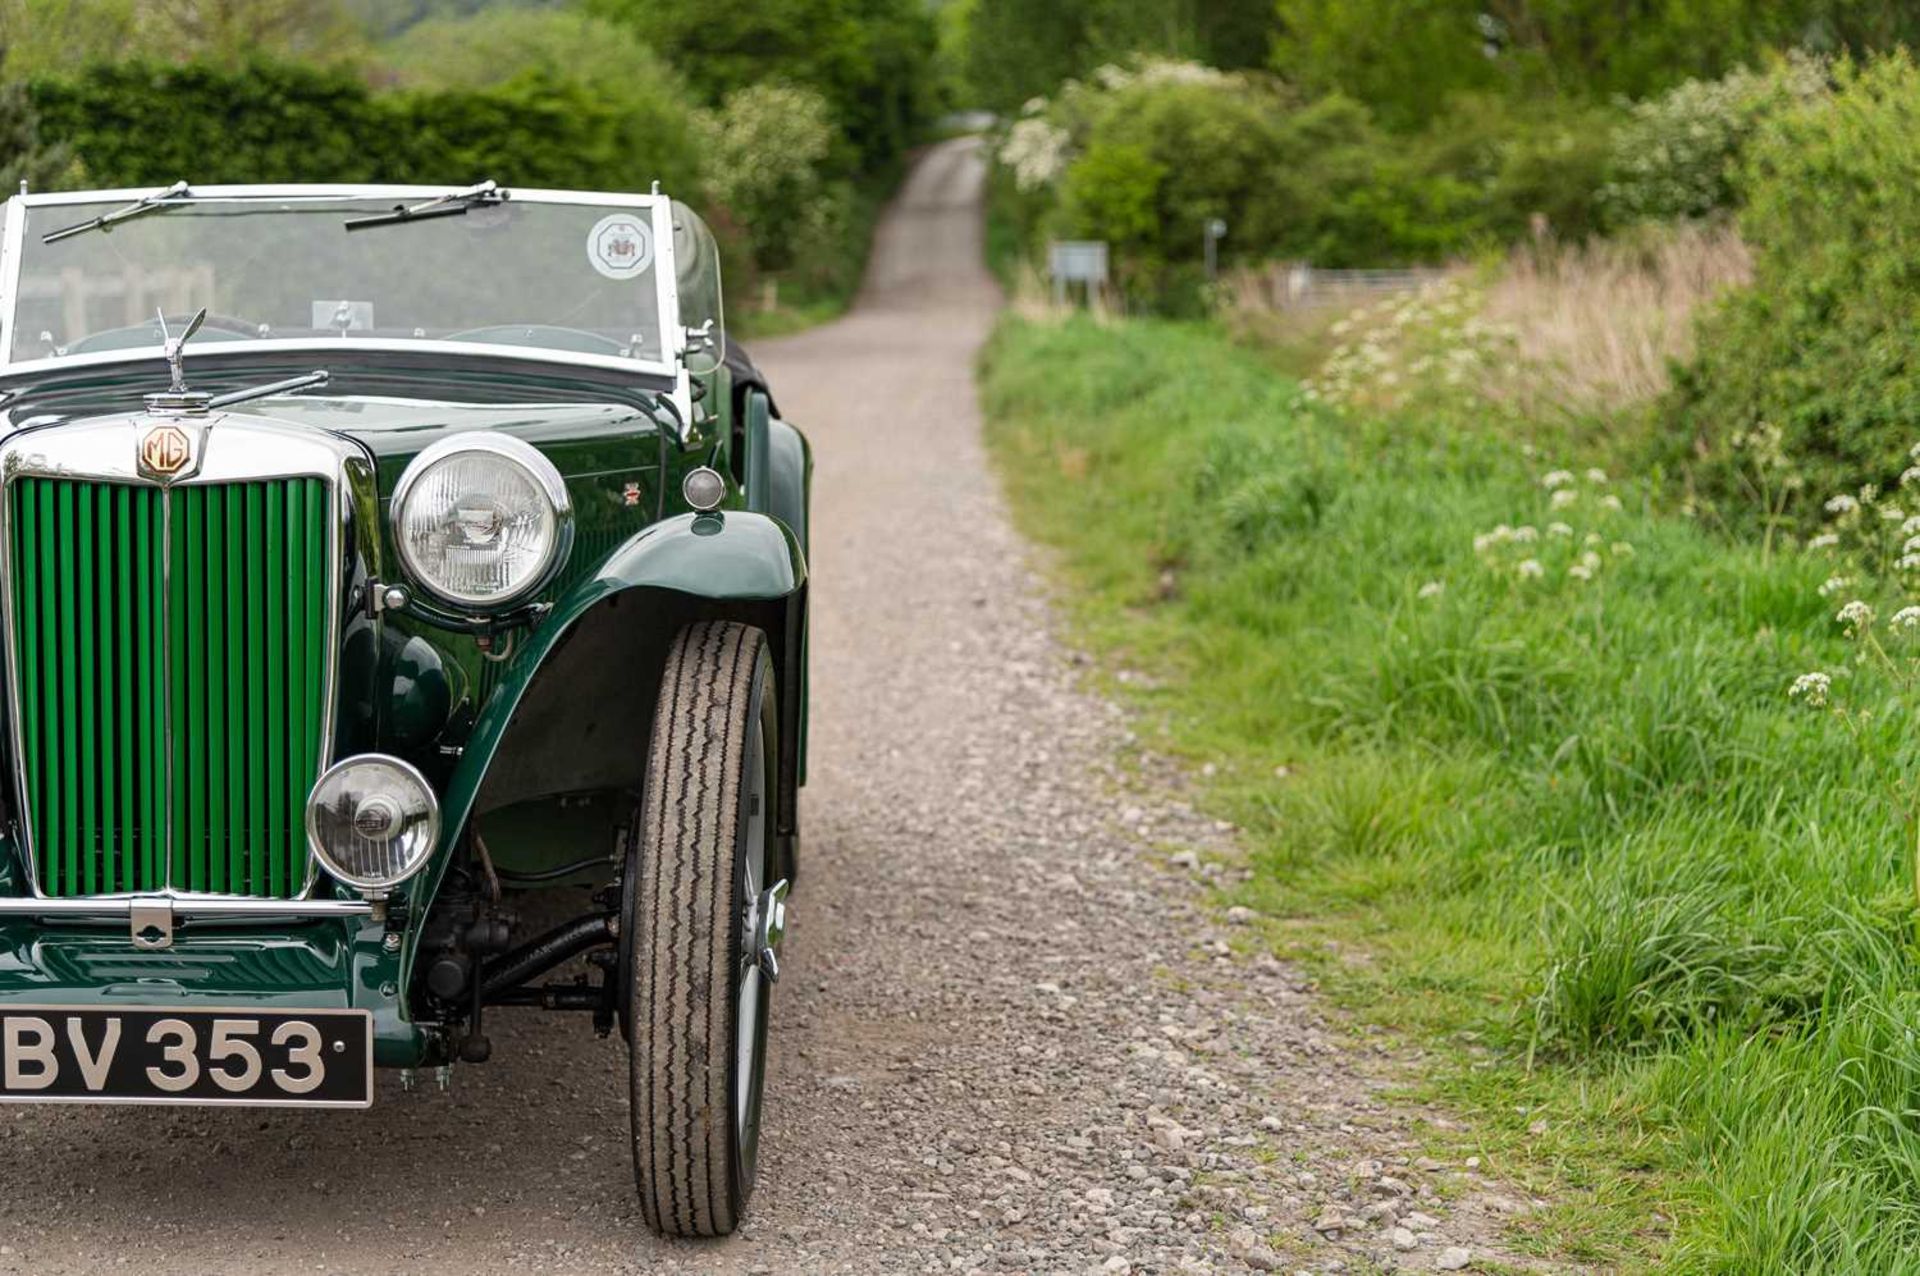 1947 MG TC Midget  Fully restored, right-hand-drive UK home market example - Image 17 of 76